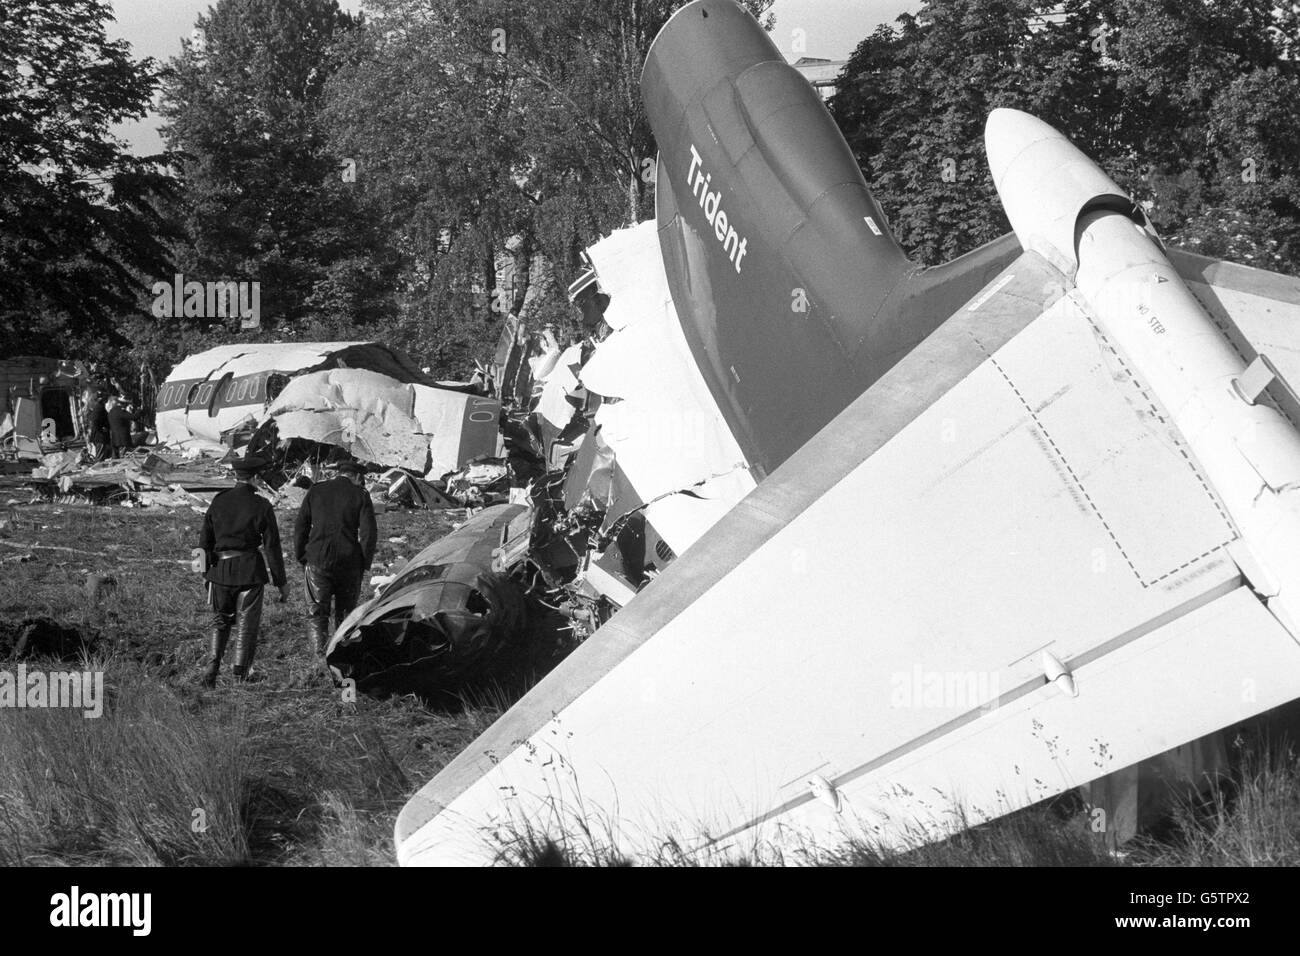 The wreckage of the Brussels-bound BEA Trident aircraft, which crashed minutes after taking off from Heathrow Airport in a field in Staines, killing all 118 people on board. Stock Photo